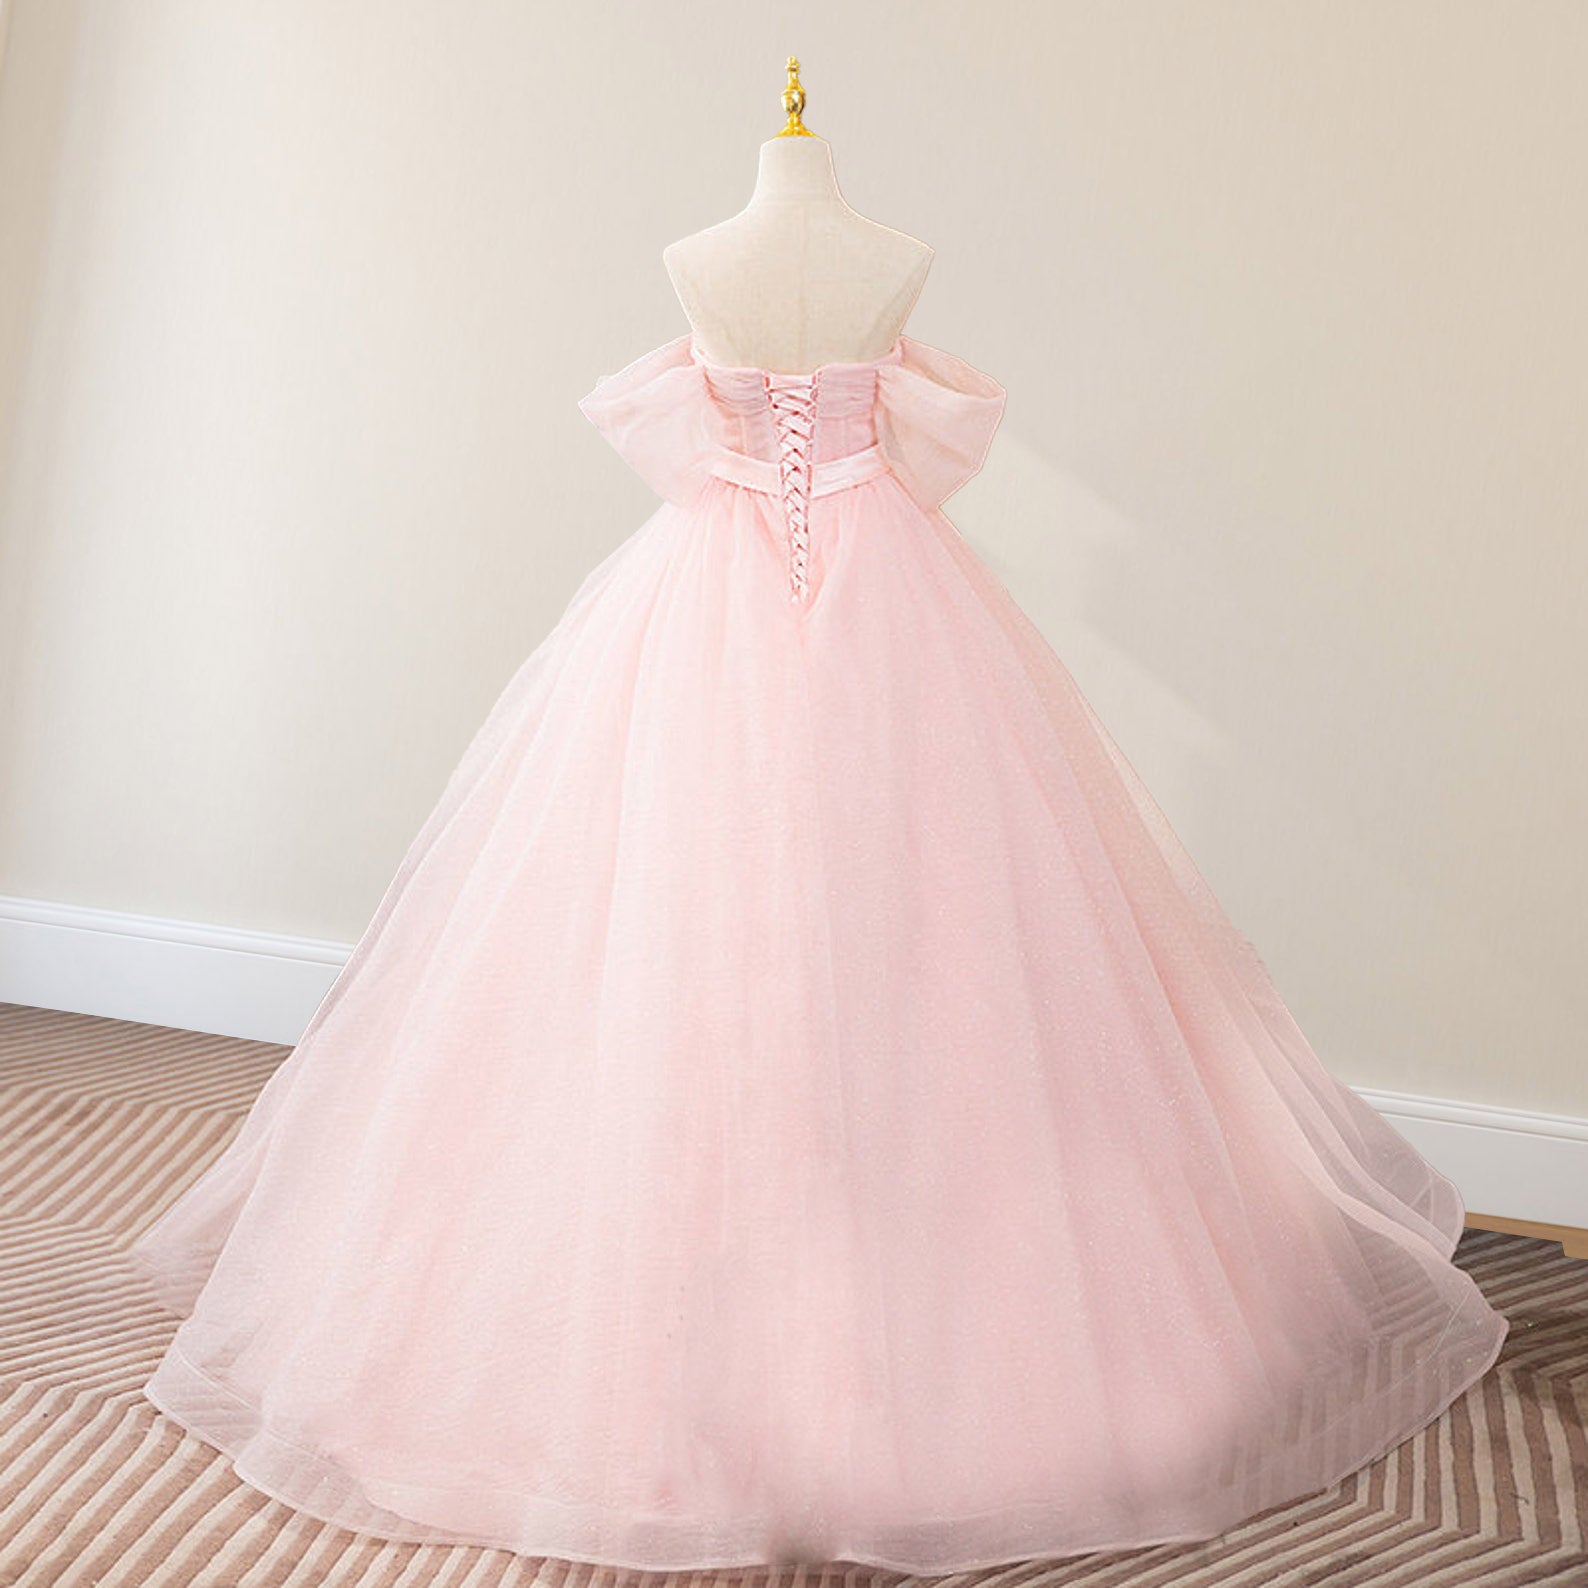 Junoesque Pink Ball-Gown Tulle Sweetheart Floor-Length Wedding Dress with Sashes